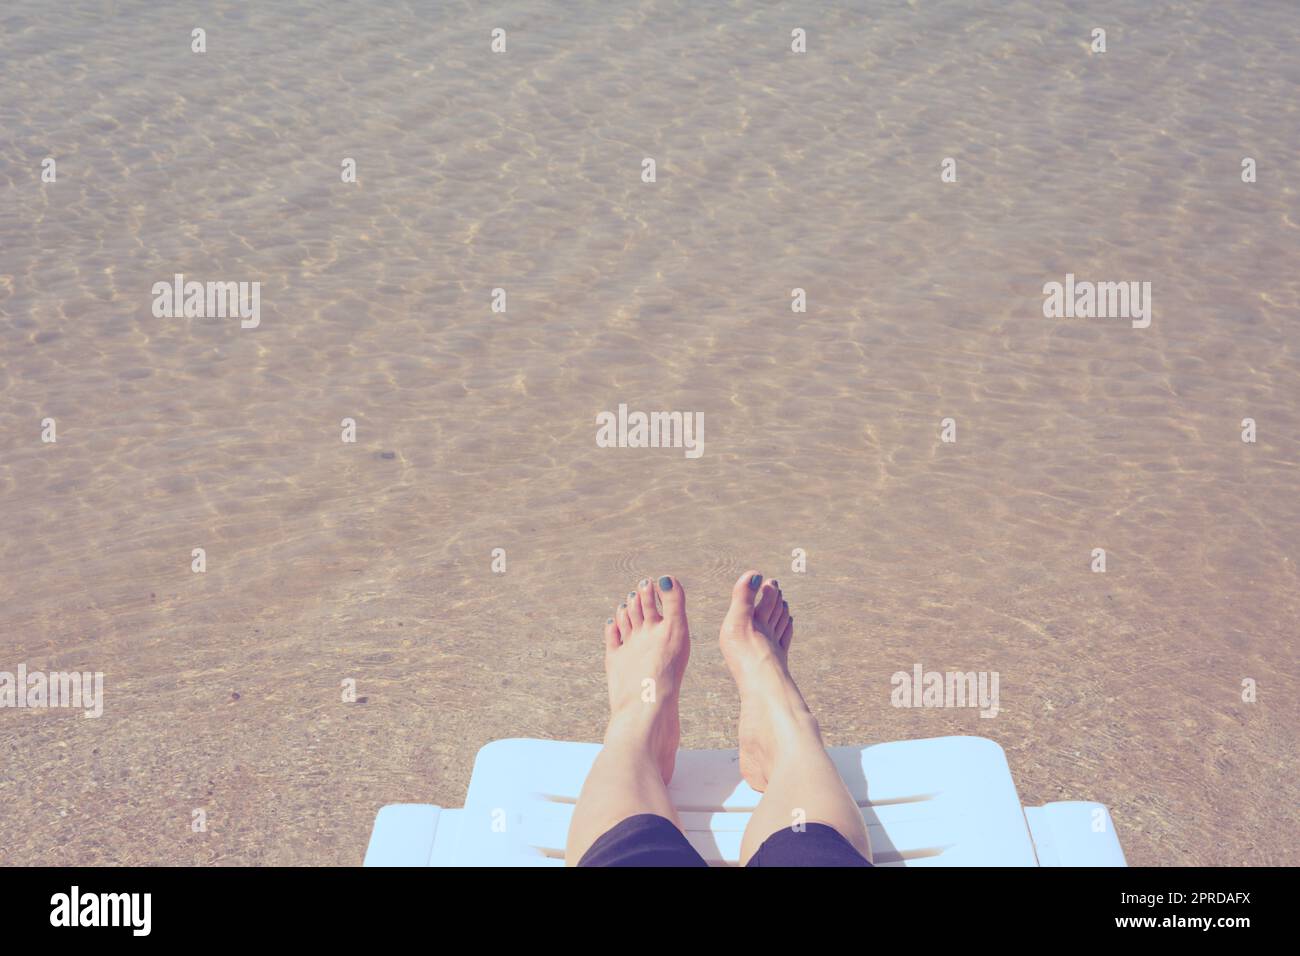 Vacation on tropical beach Woman's legs on the beach bed with clear ocean water background Stock Photo